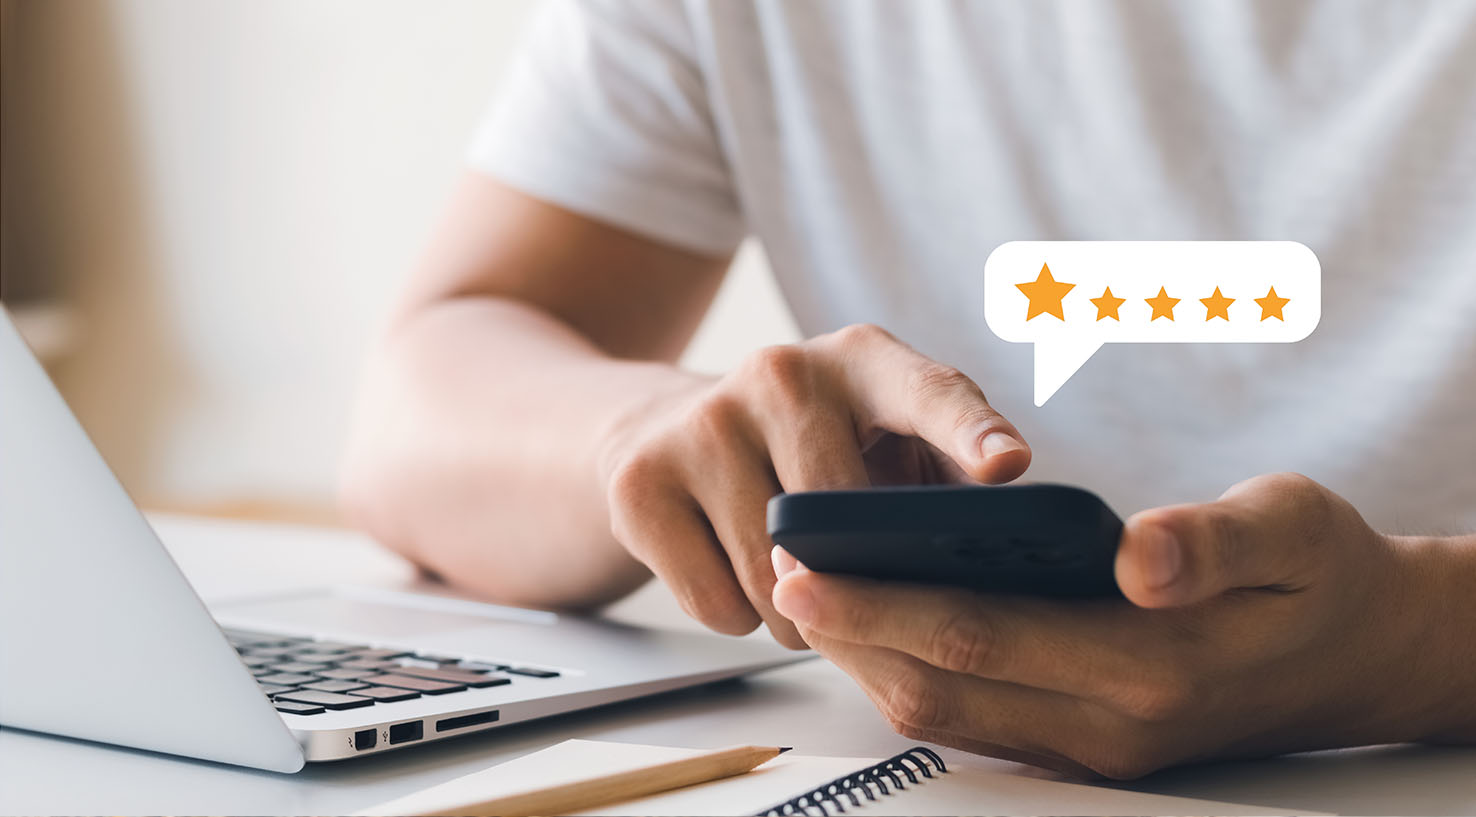 What Online Reviews Can Do for You